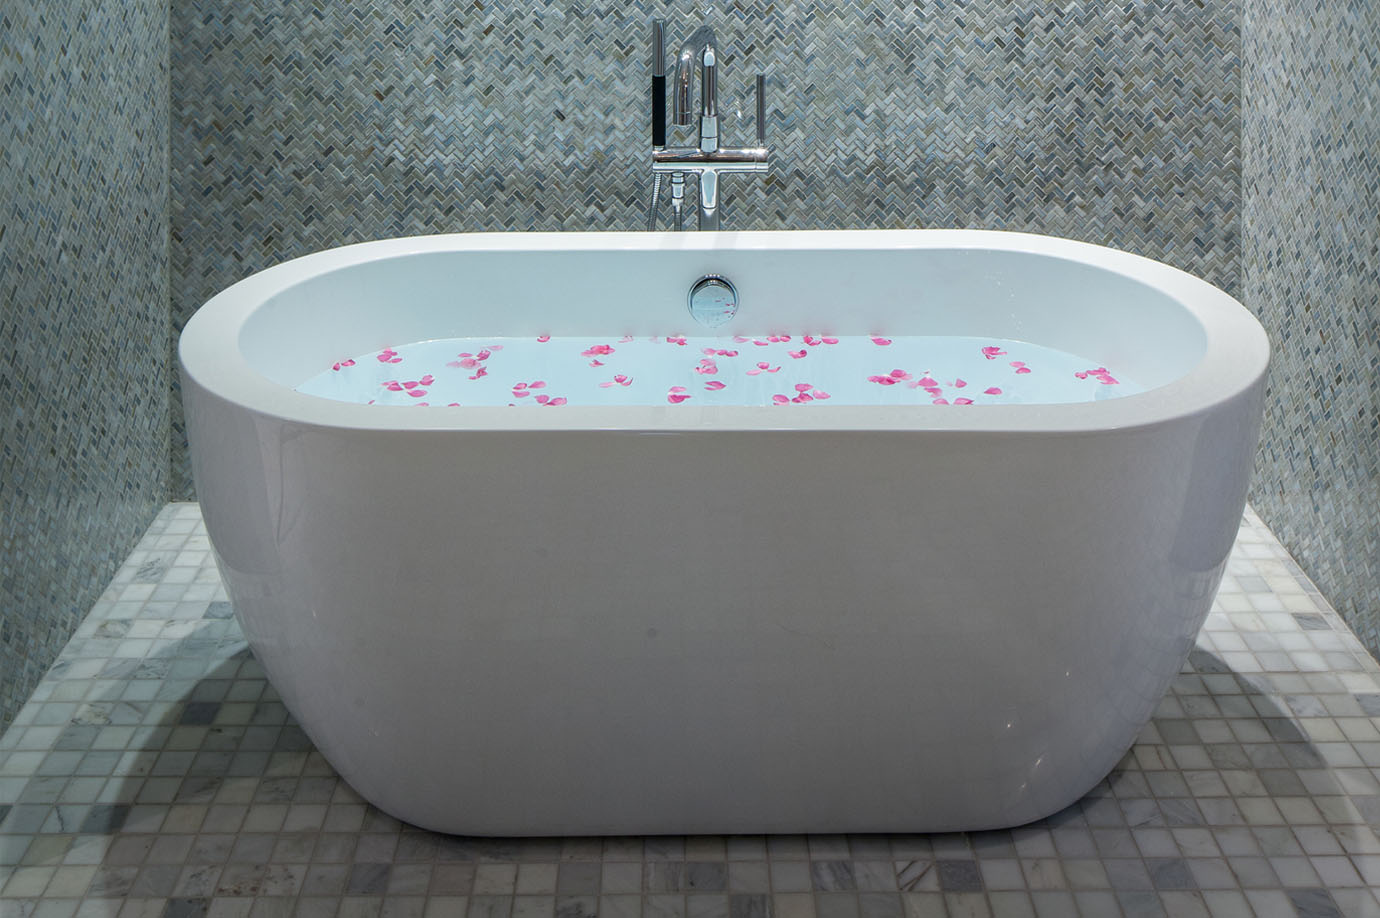 White soaking tub in the Sea Oats Estate filled with water and rose petals, surrounded by tiled walls in Captiva Island, FL